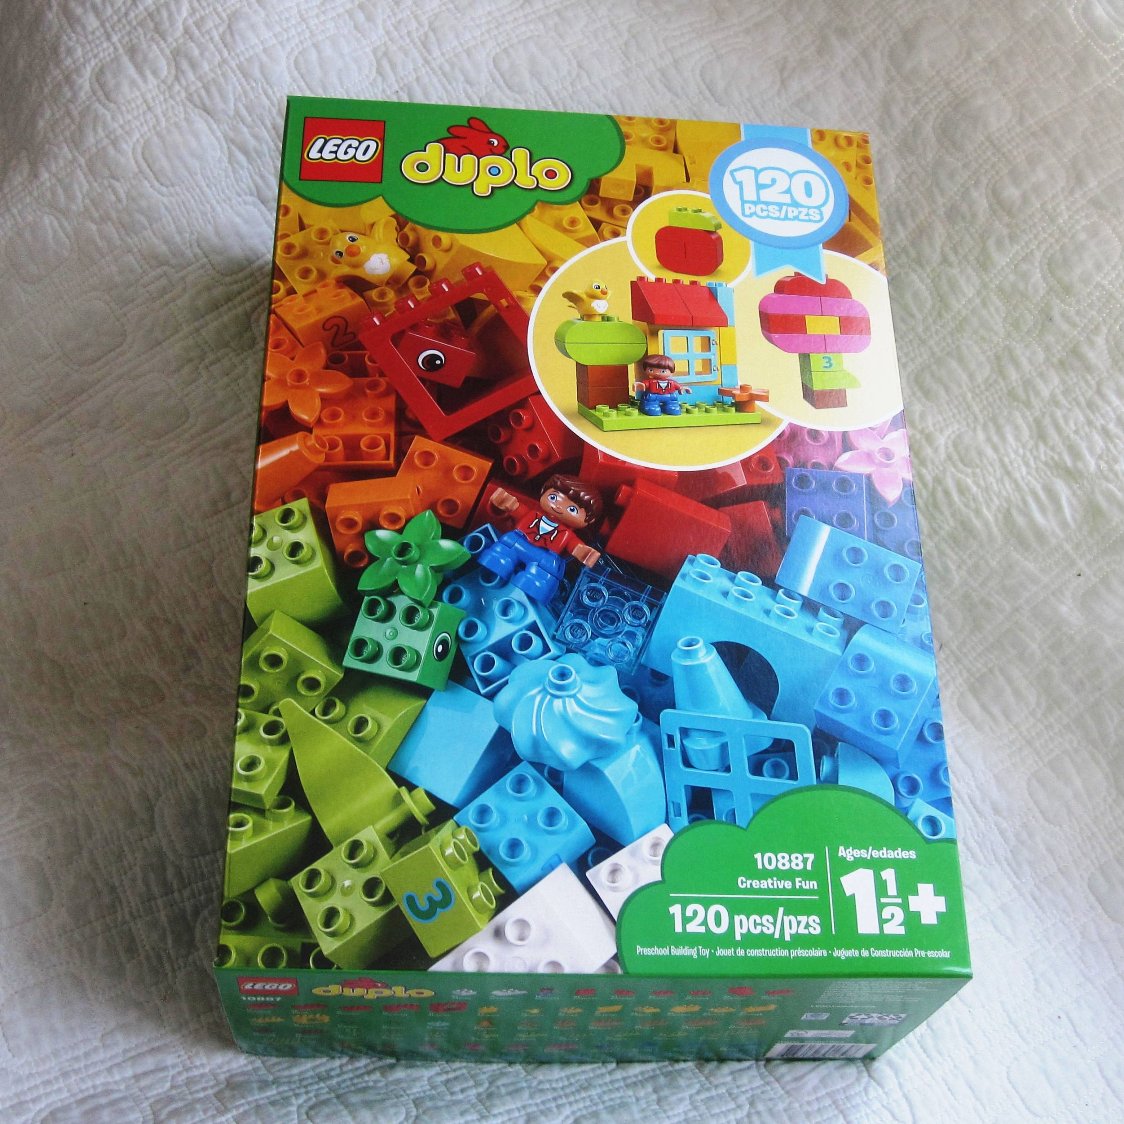 LEGO Duplo Creative Building Kit, 120 Pieces, Ages 18mo.+ Dragonfly Castle